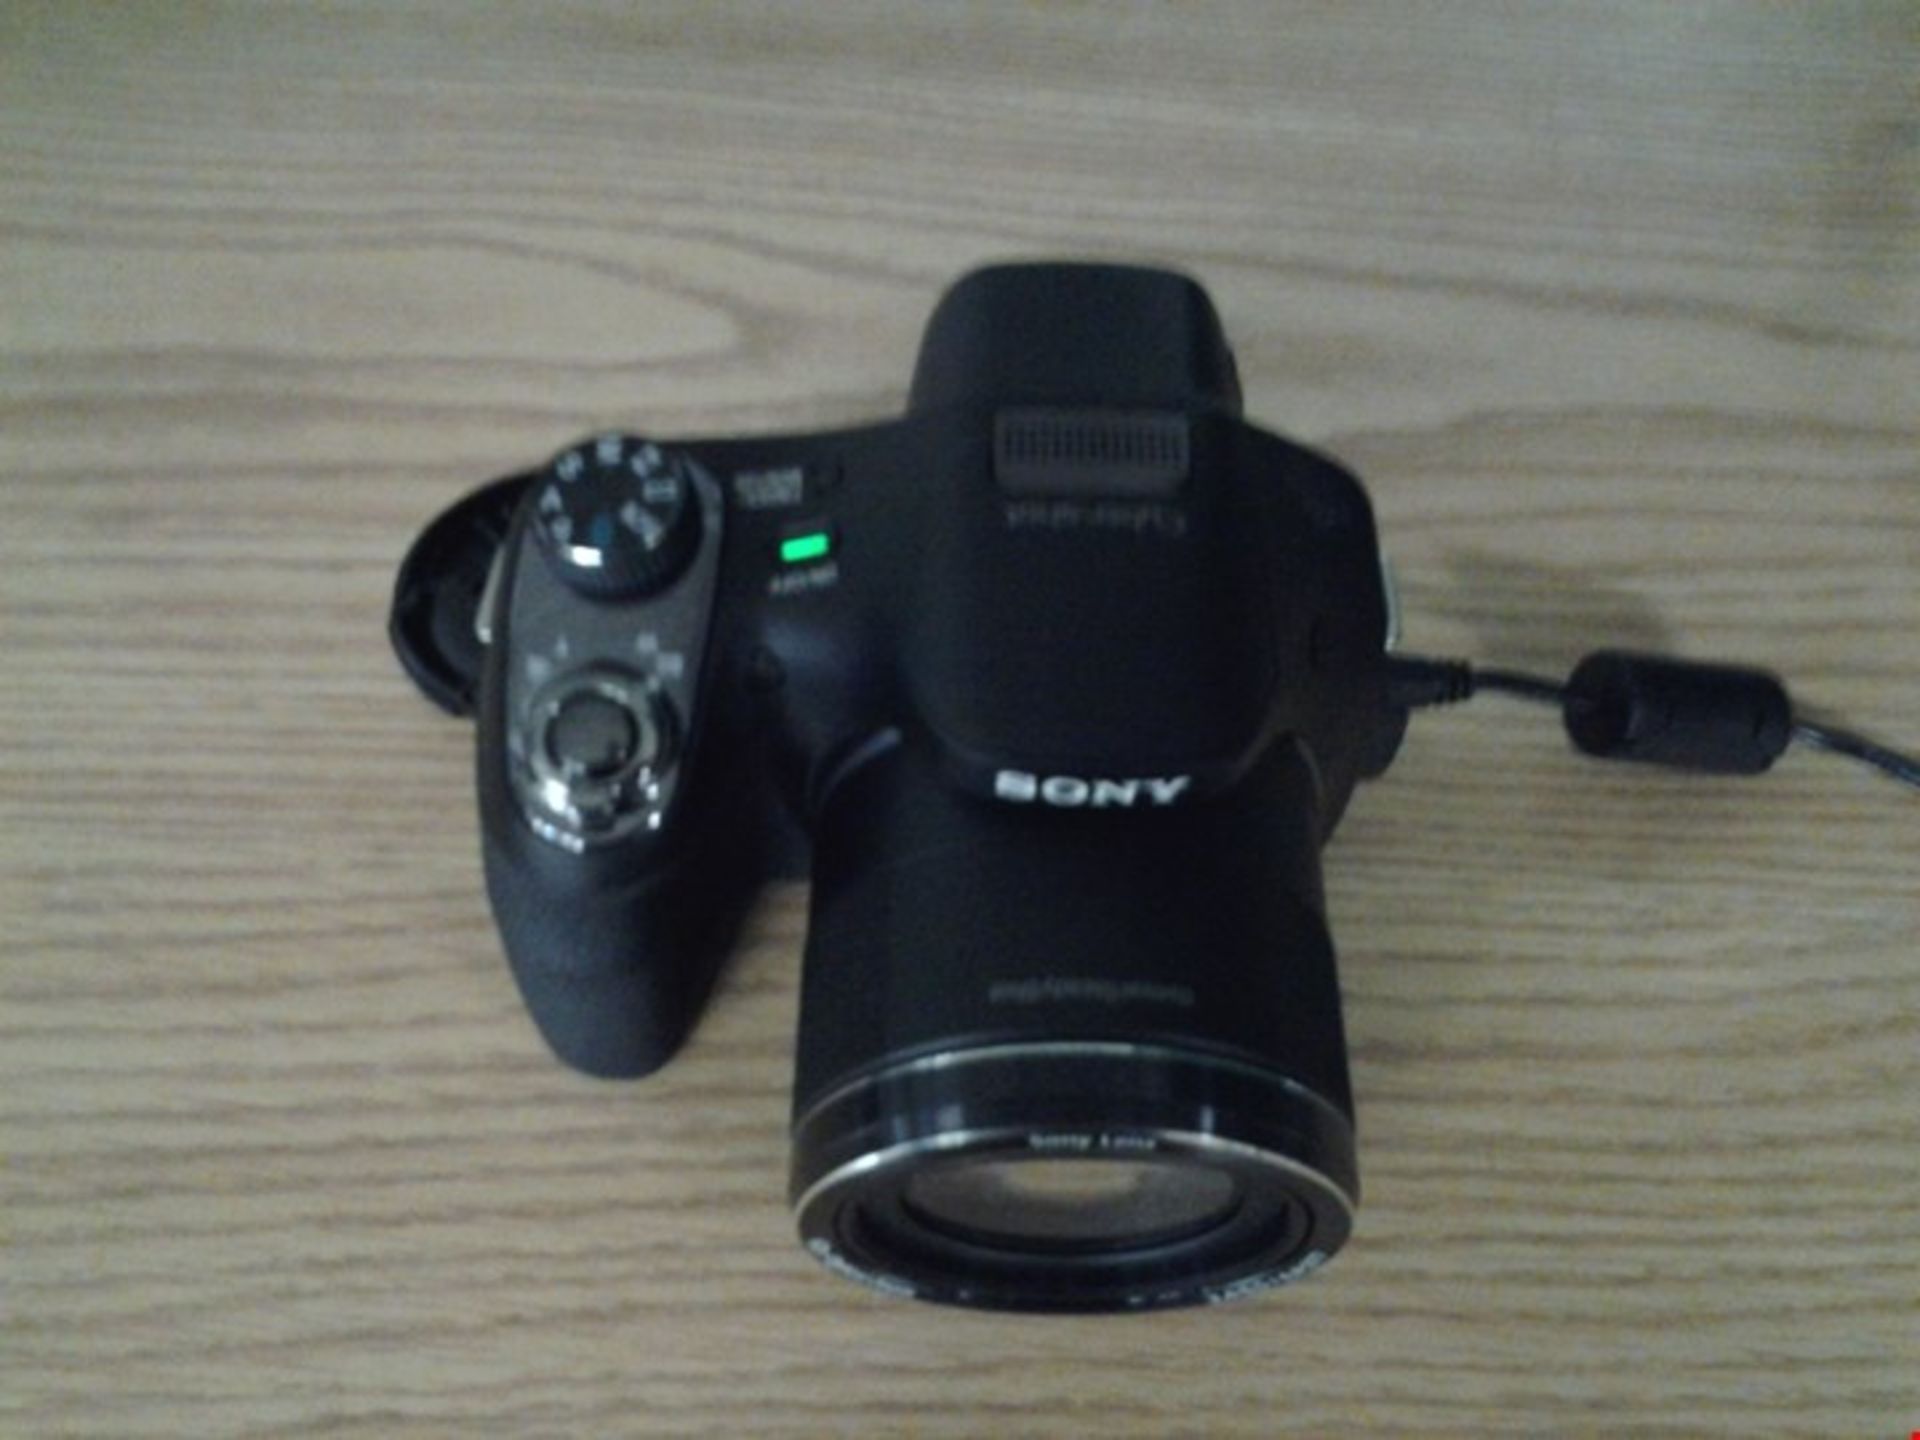 BOXED GRADE 1 SONY DSCH400 20.1 MEGAPIXEL 63X OPTICAL ZOOM DIGITAL CAMERA RRP Â£475.00 - Image 2 of 2